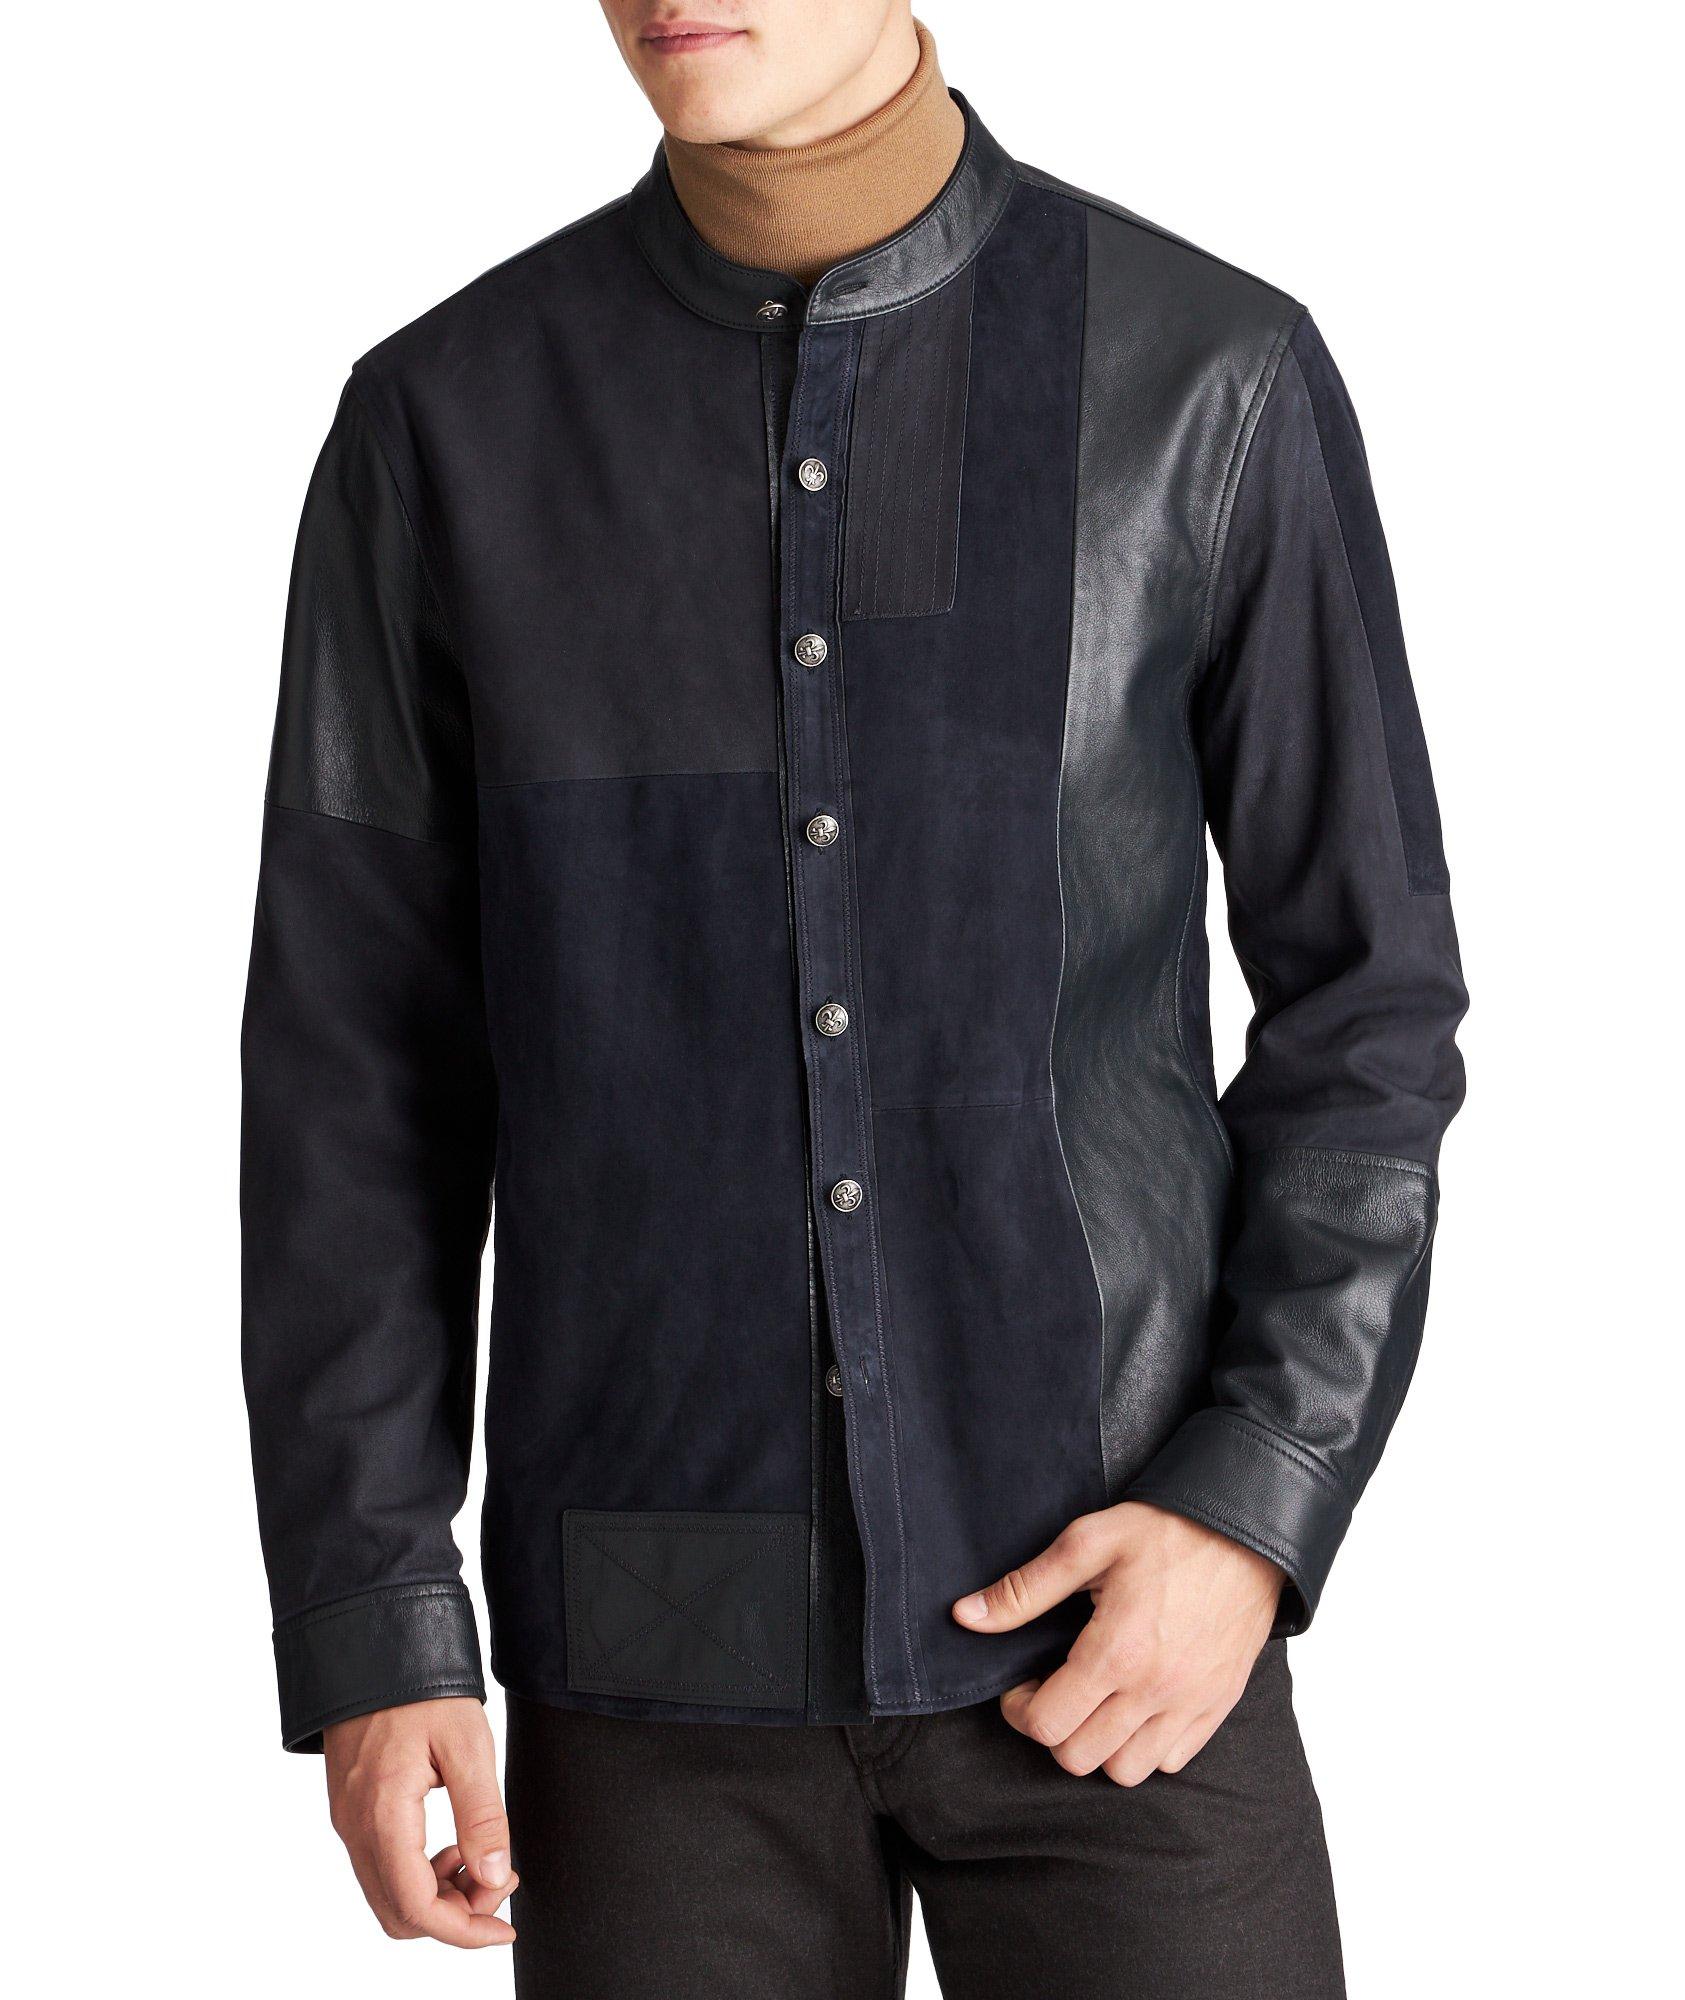 Patchwork Leather & Suede Shirt Jacket image 0